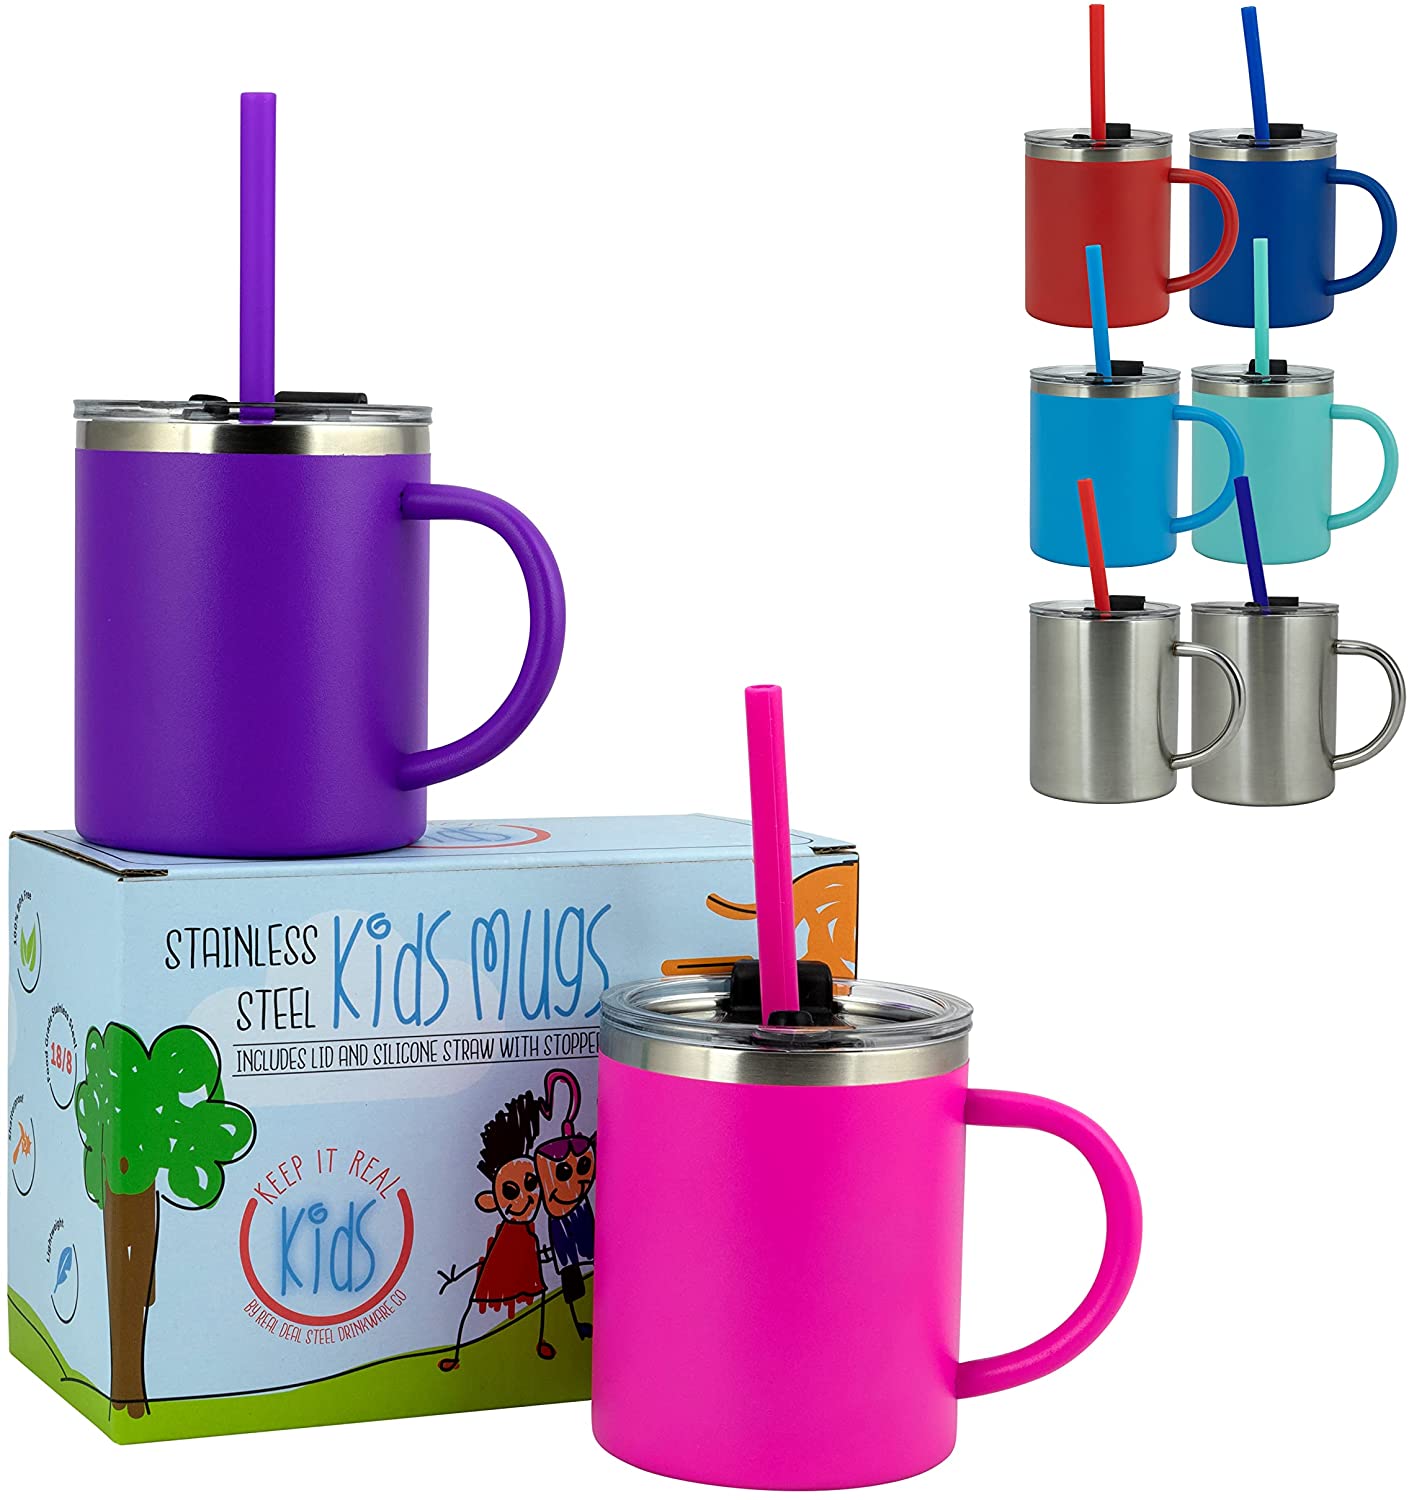 2 Mugs Purple and Pink Made in USA Non Toxic Lead Free Free